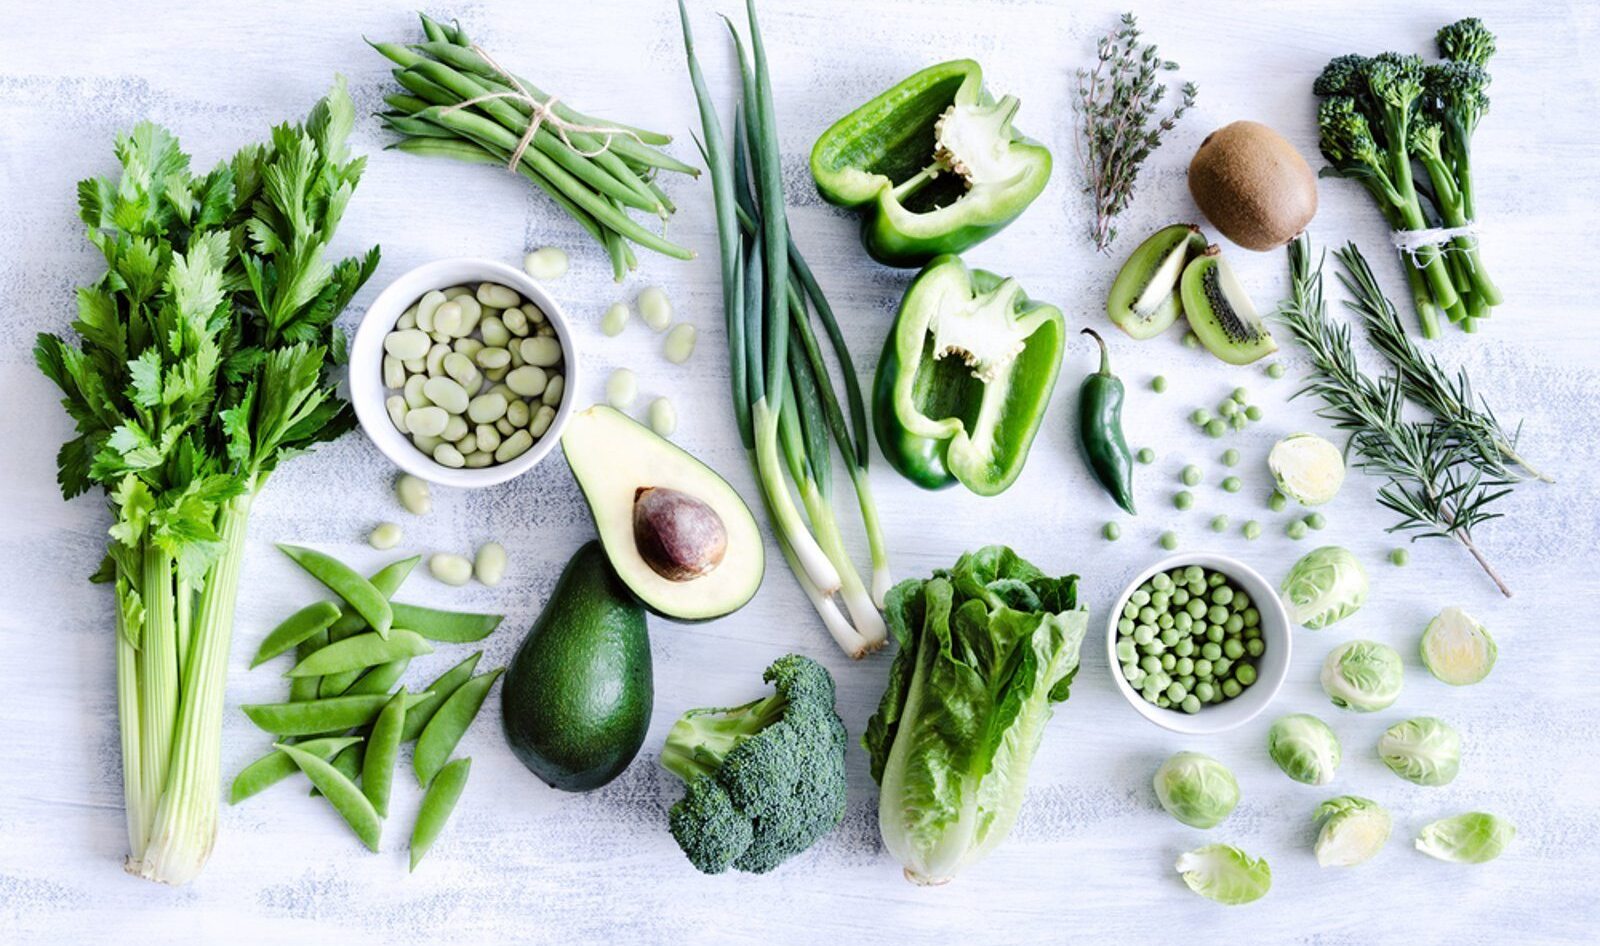 8 Healthy Green Foods to Eat on St. Patrick's Day and Every Day